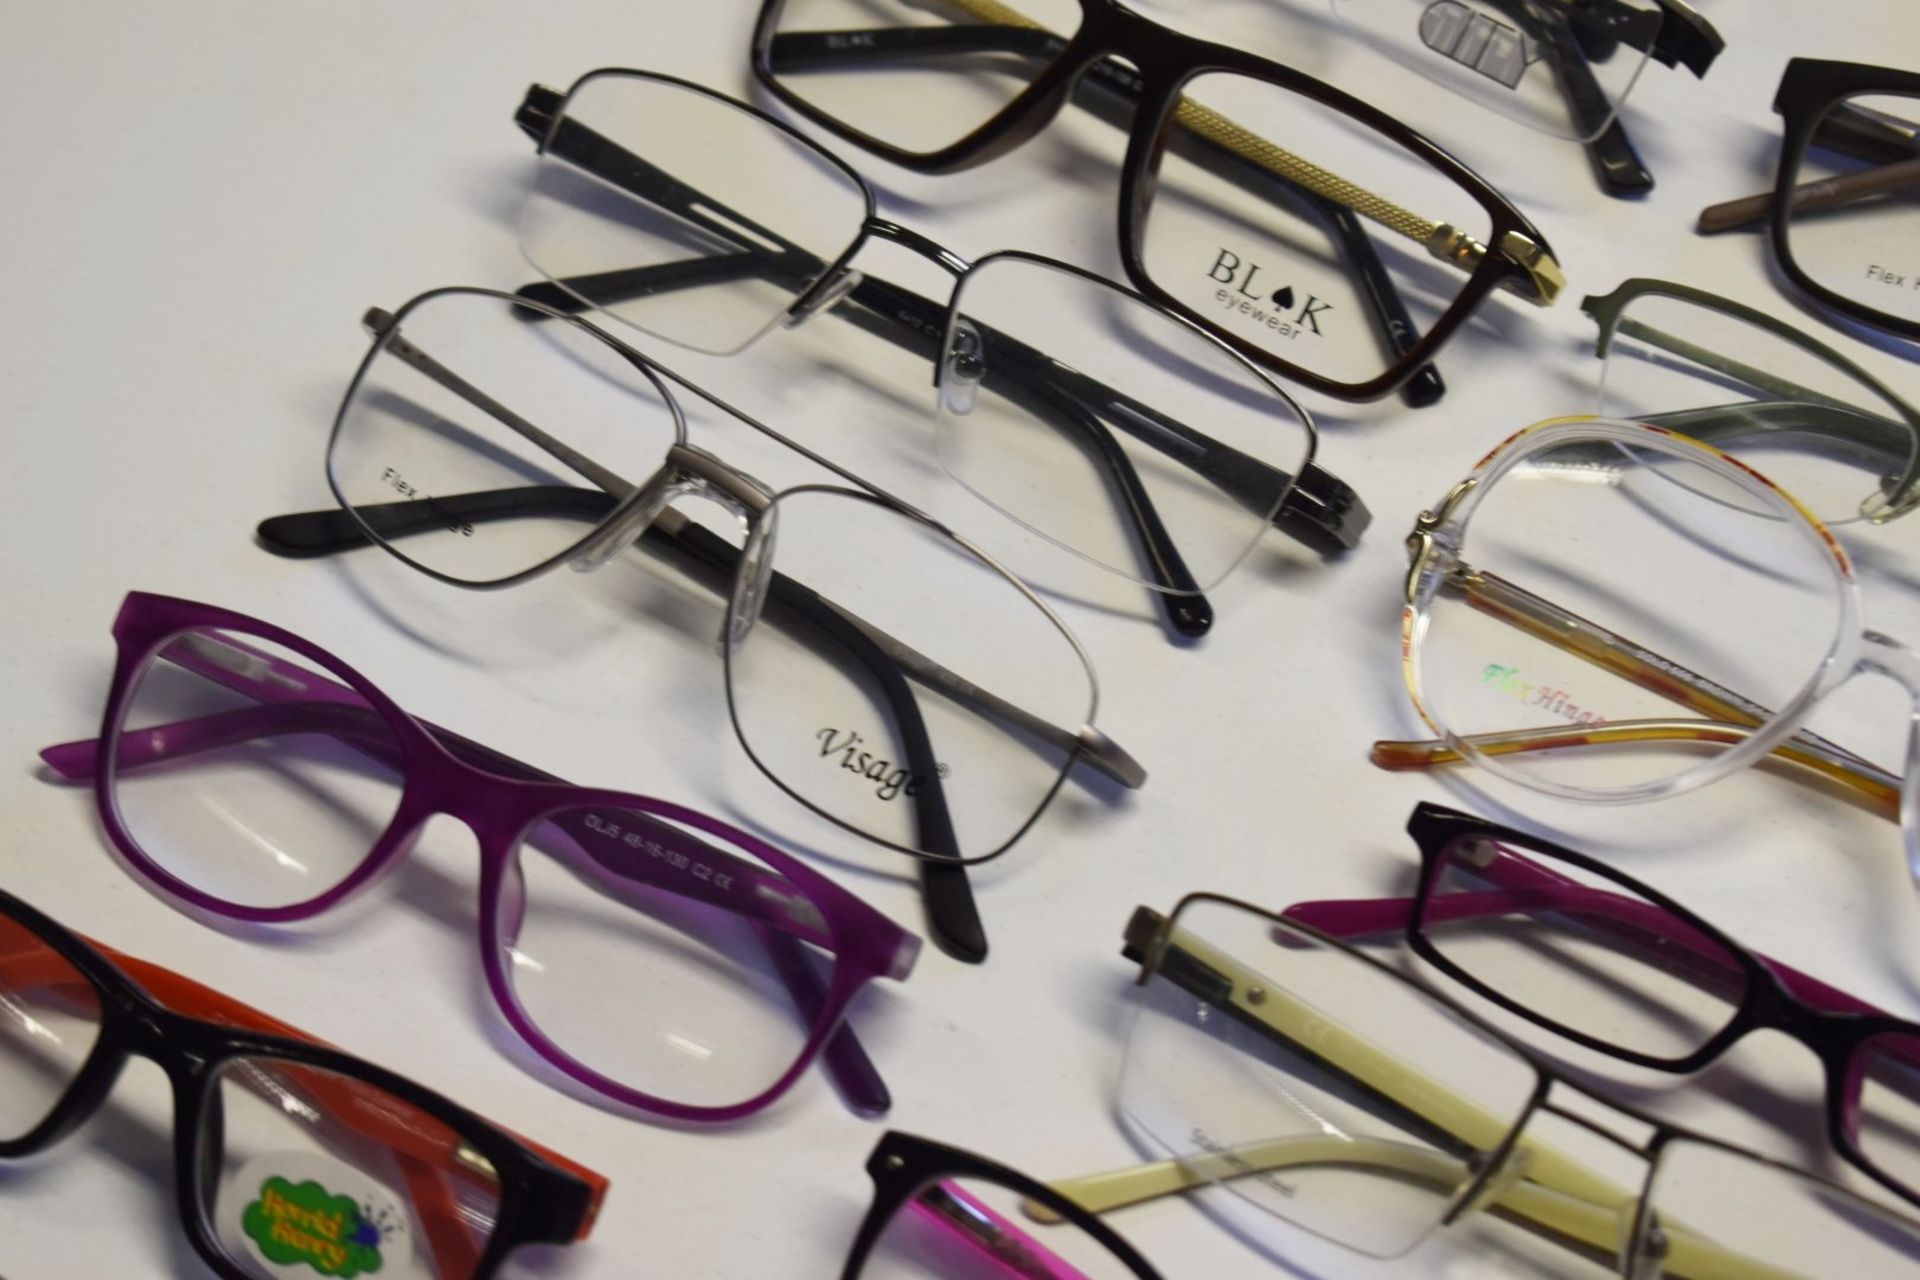 100 x Assorted Pairs of Spectacle Eye Glasses - New and Unused Stock - Various Designs and Brands - Image 19 of 27